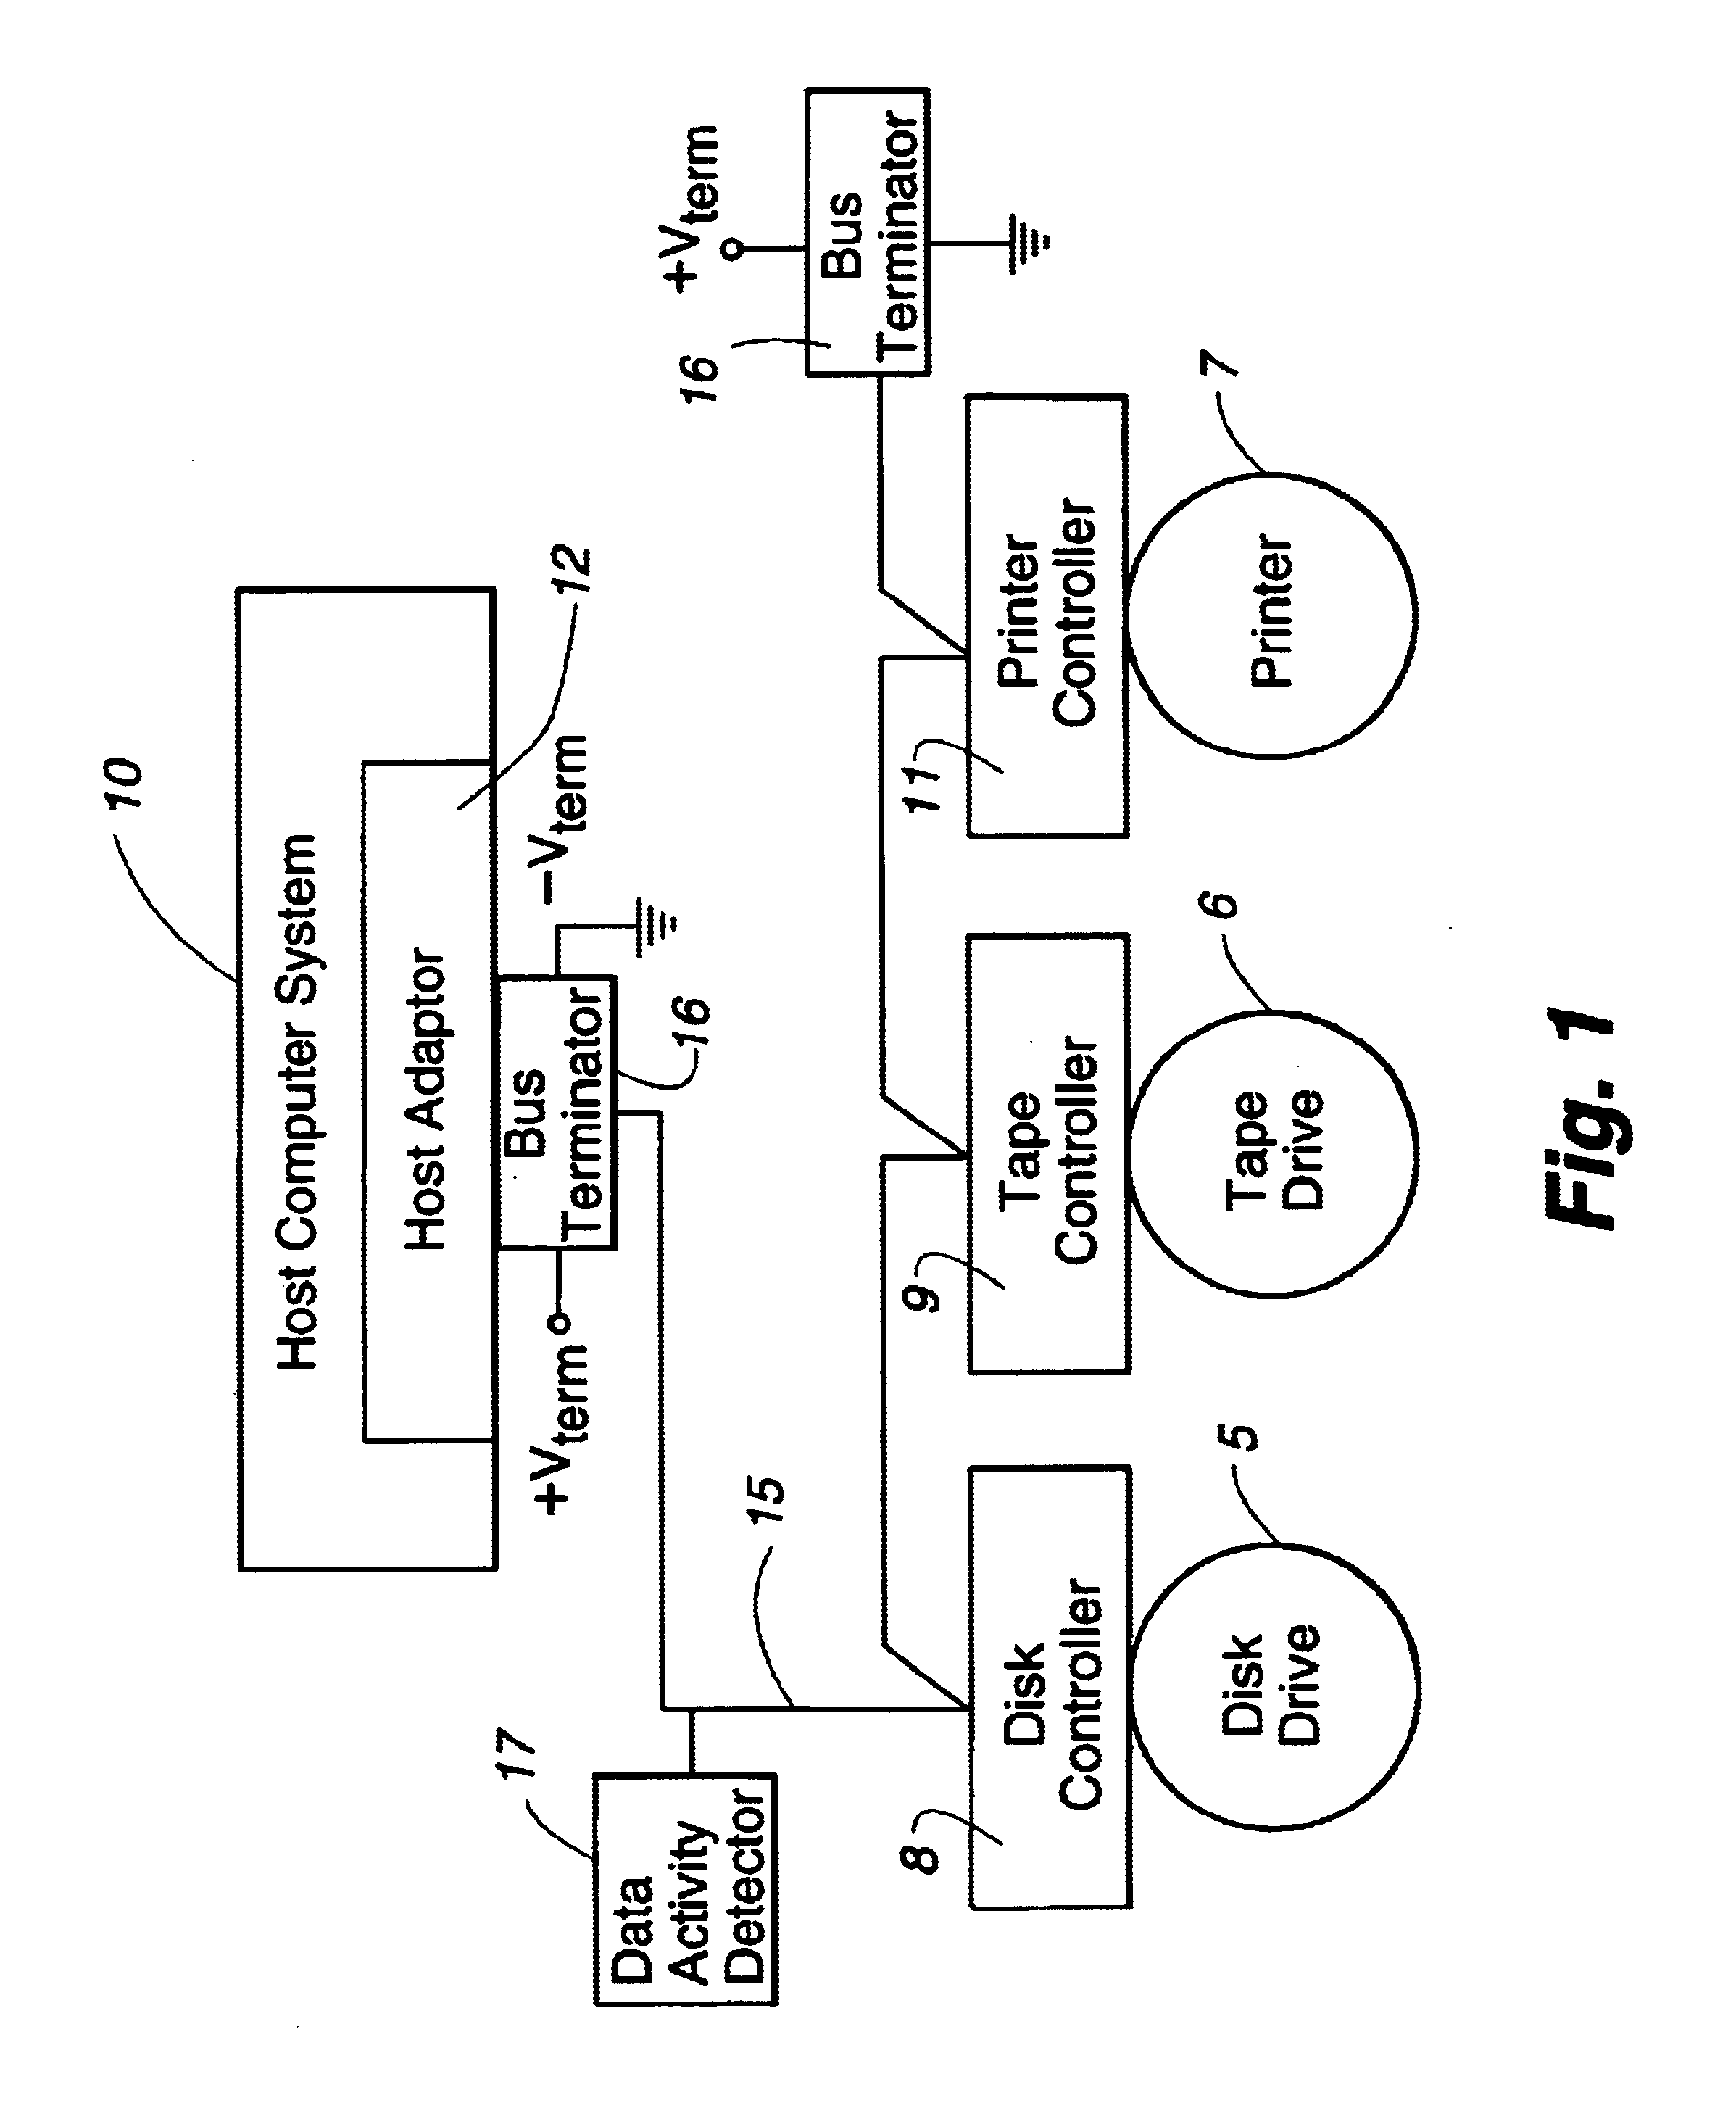 Method for transmitting data over a data bus with minimized digital inter-symbol interference